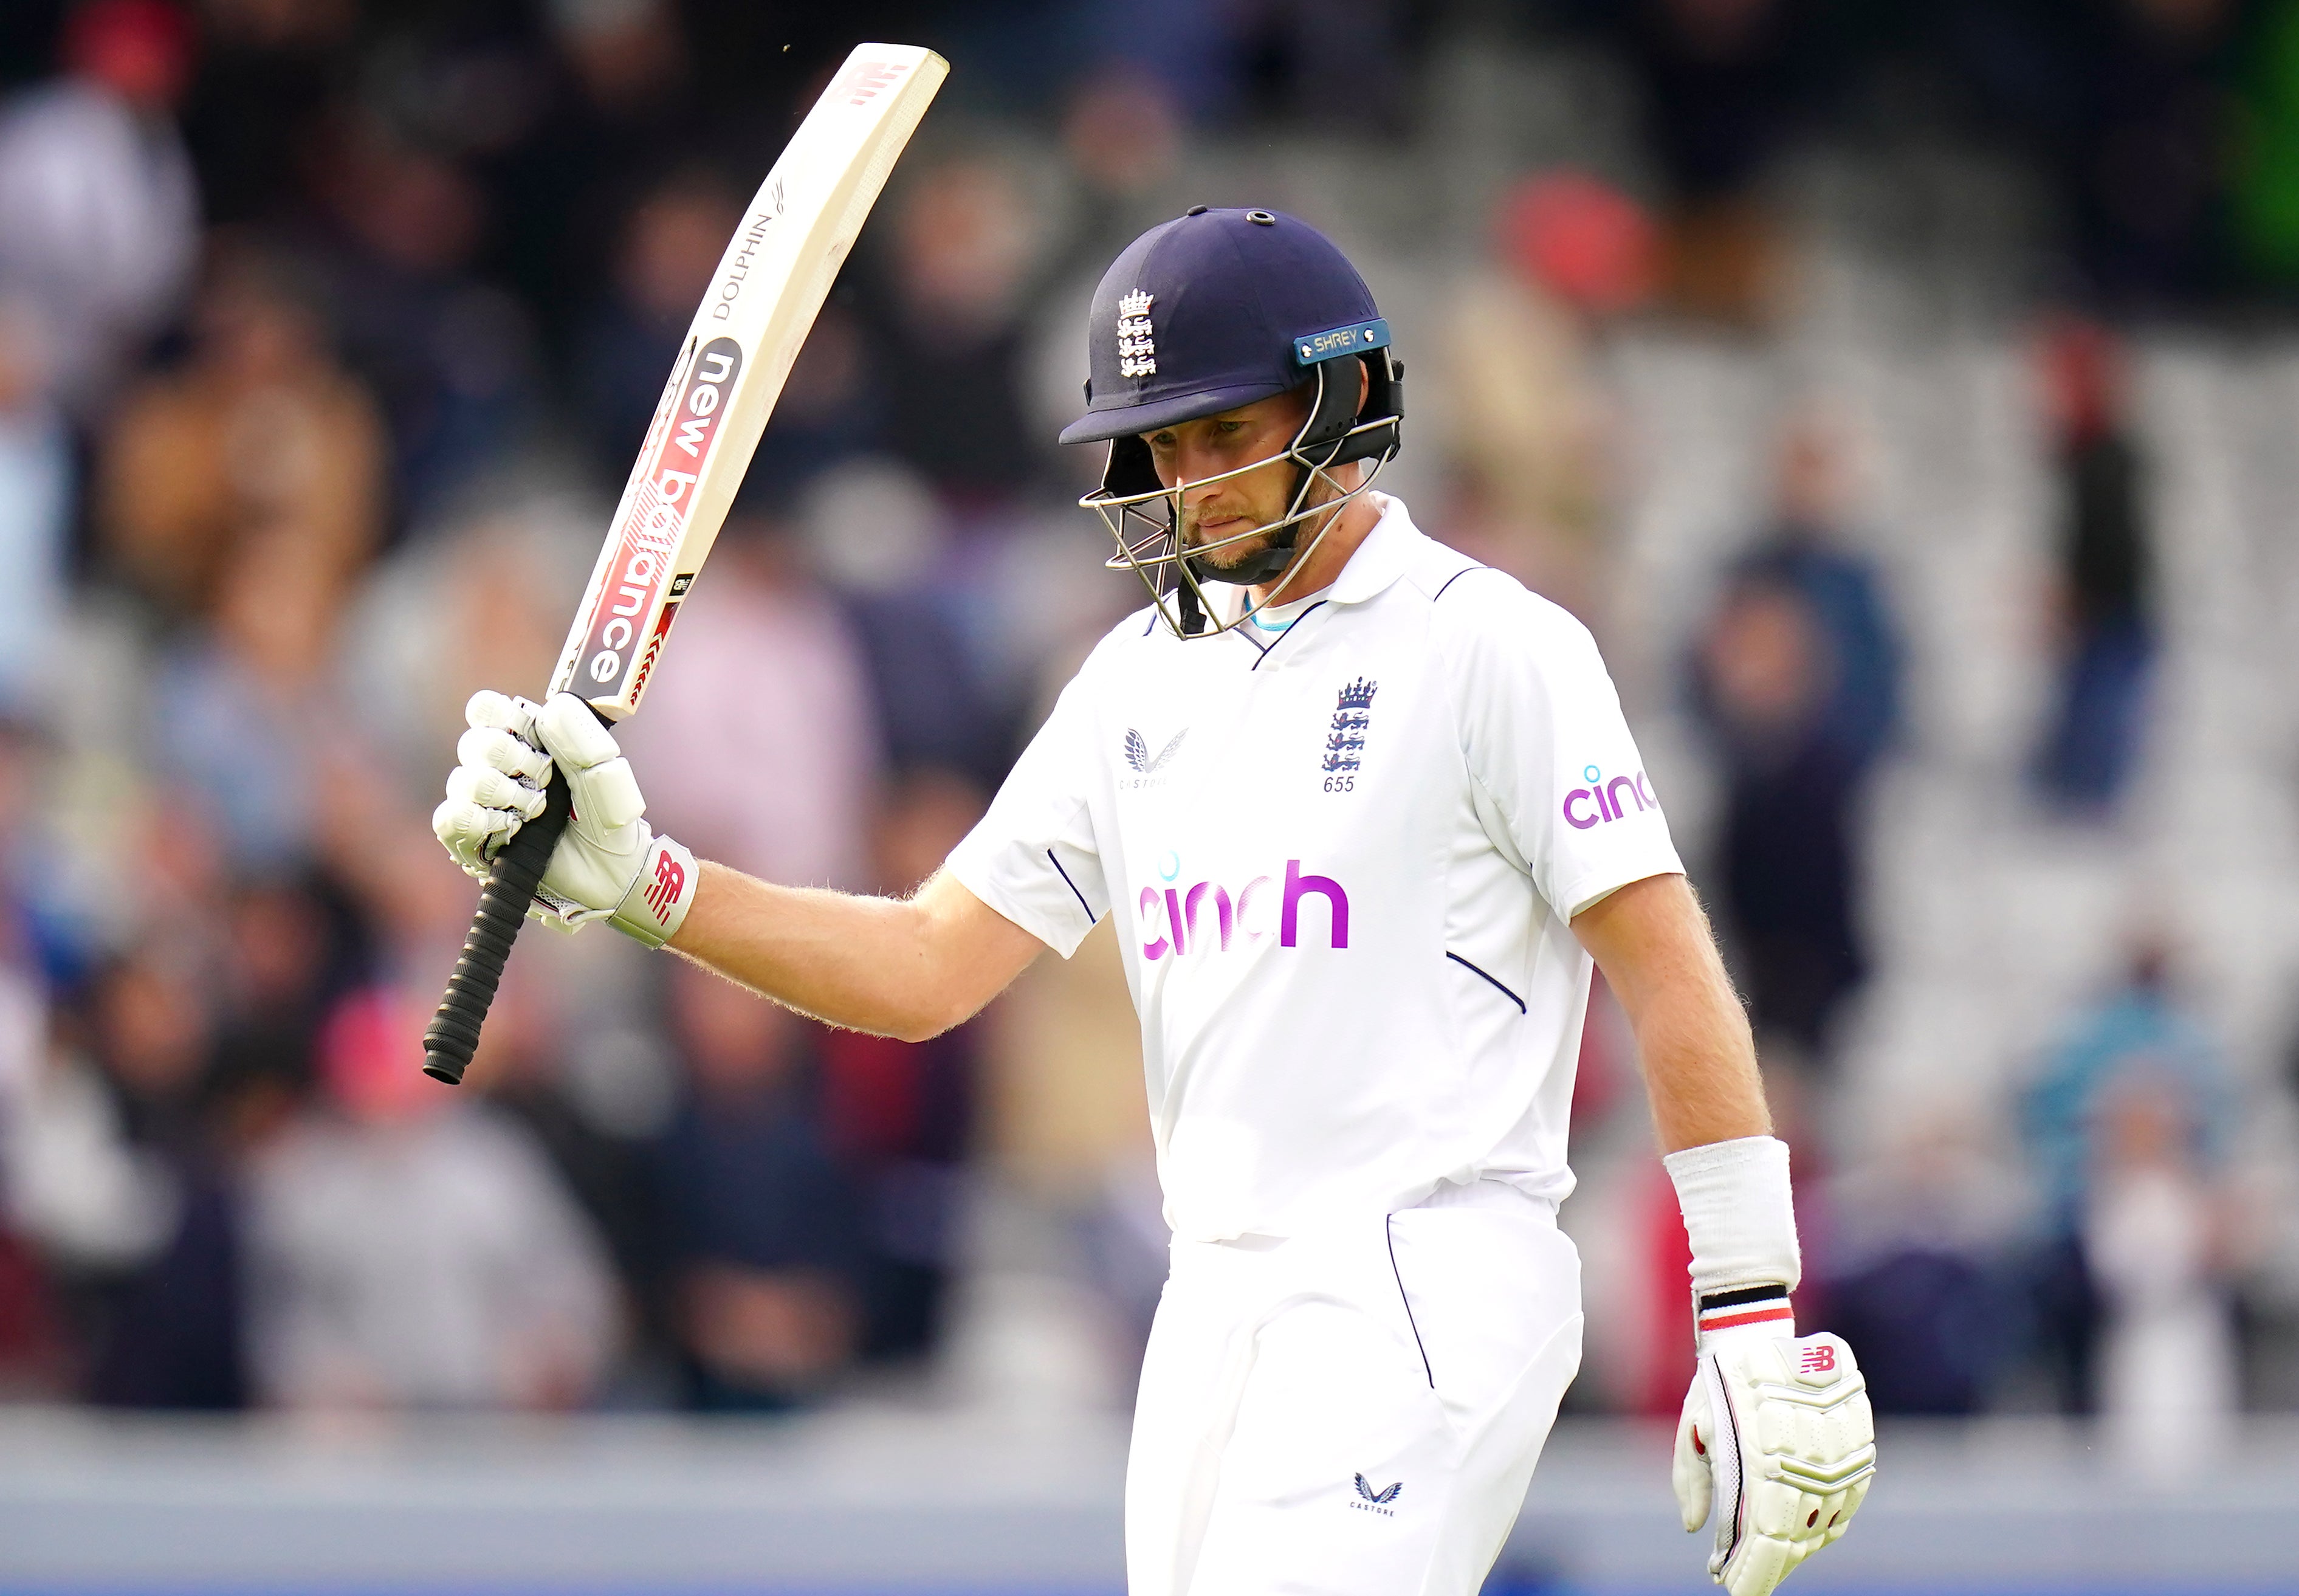 Joe Root hit a half century for England at Lord’s